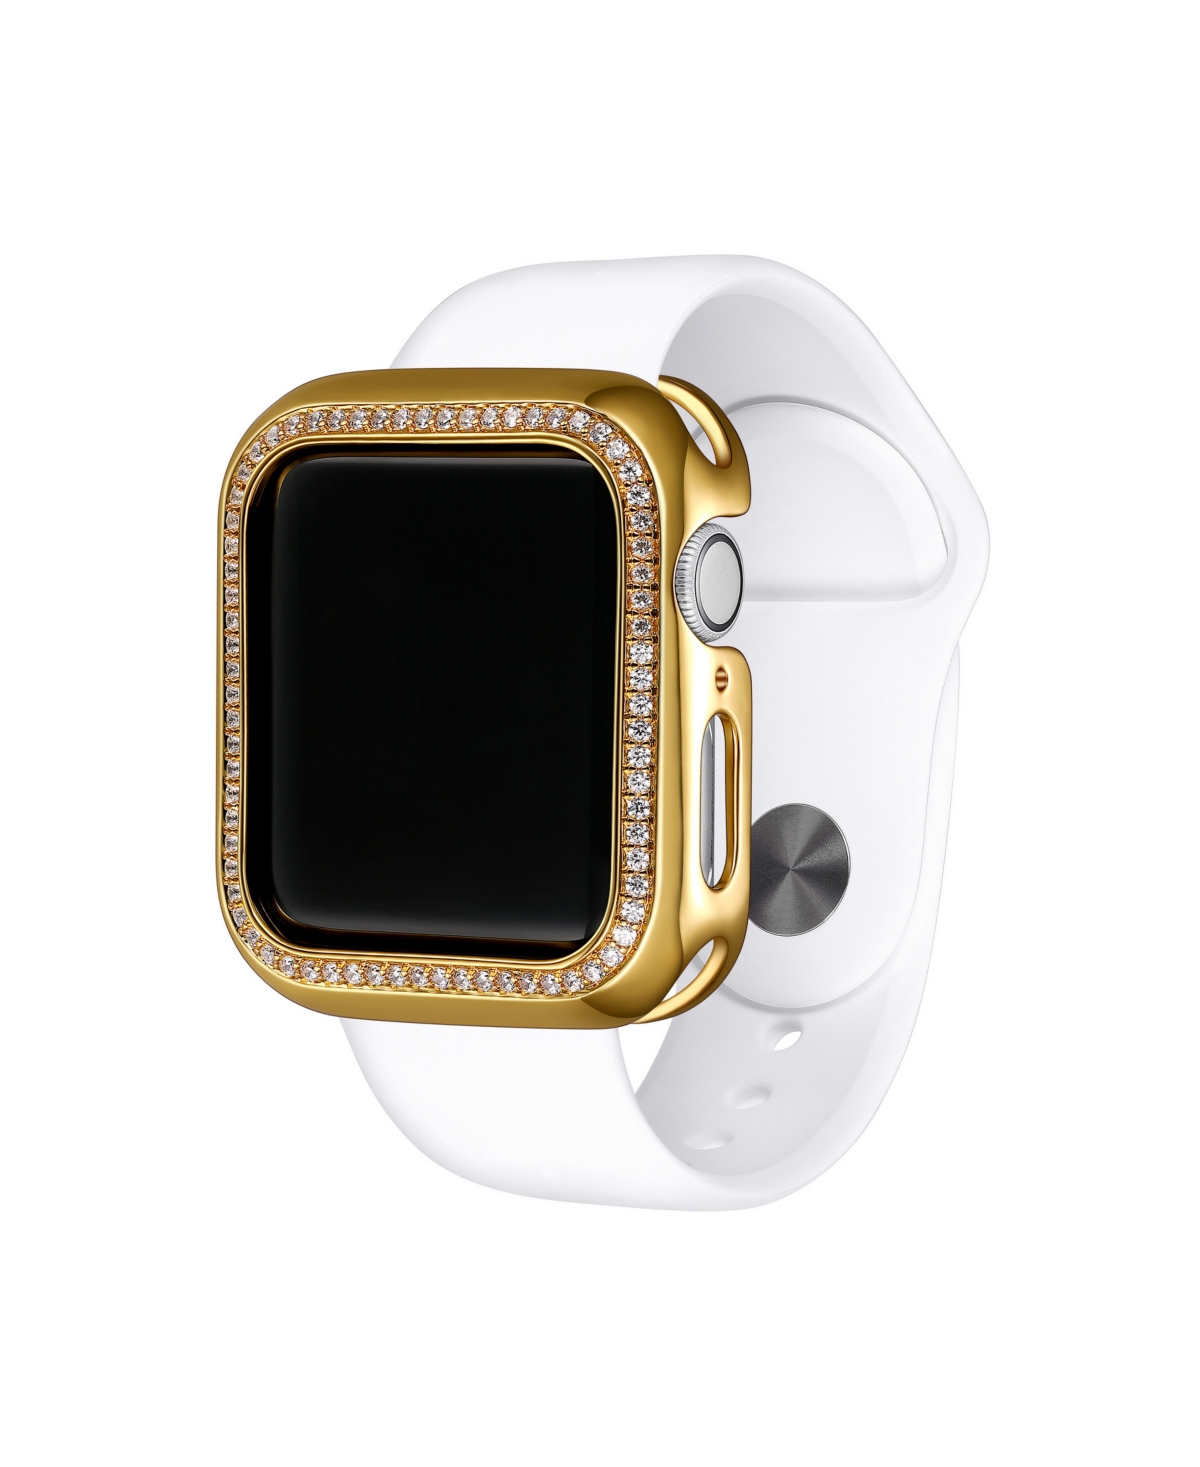 Halo Apple Watch Case, Series 4-5, 40mm - Gold-Tone